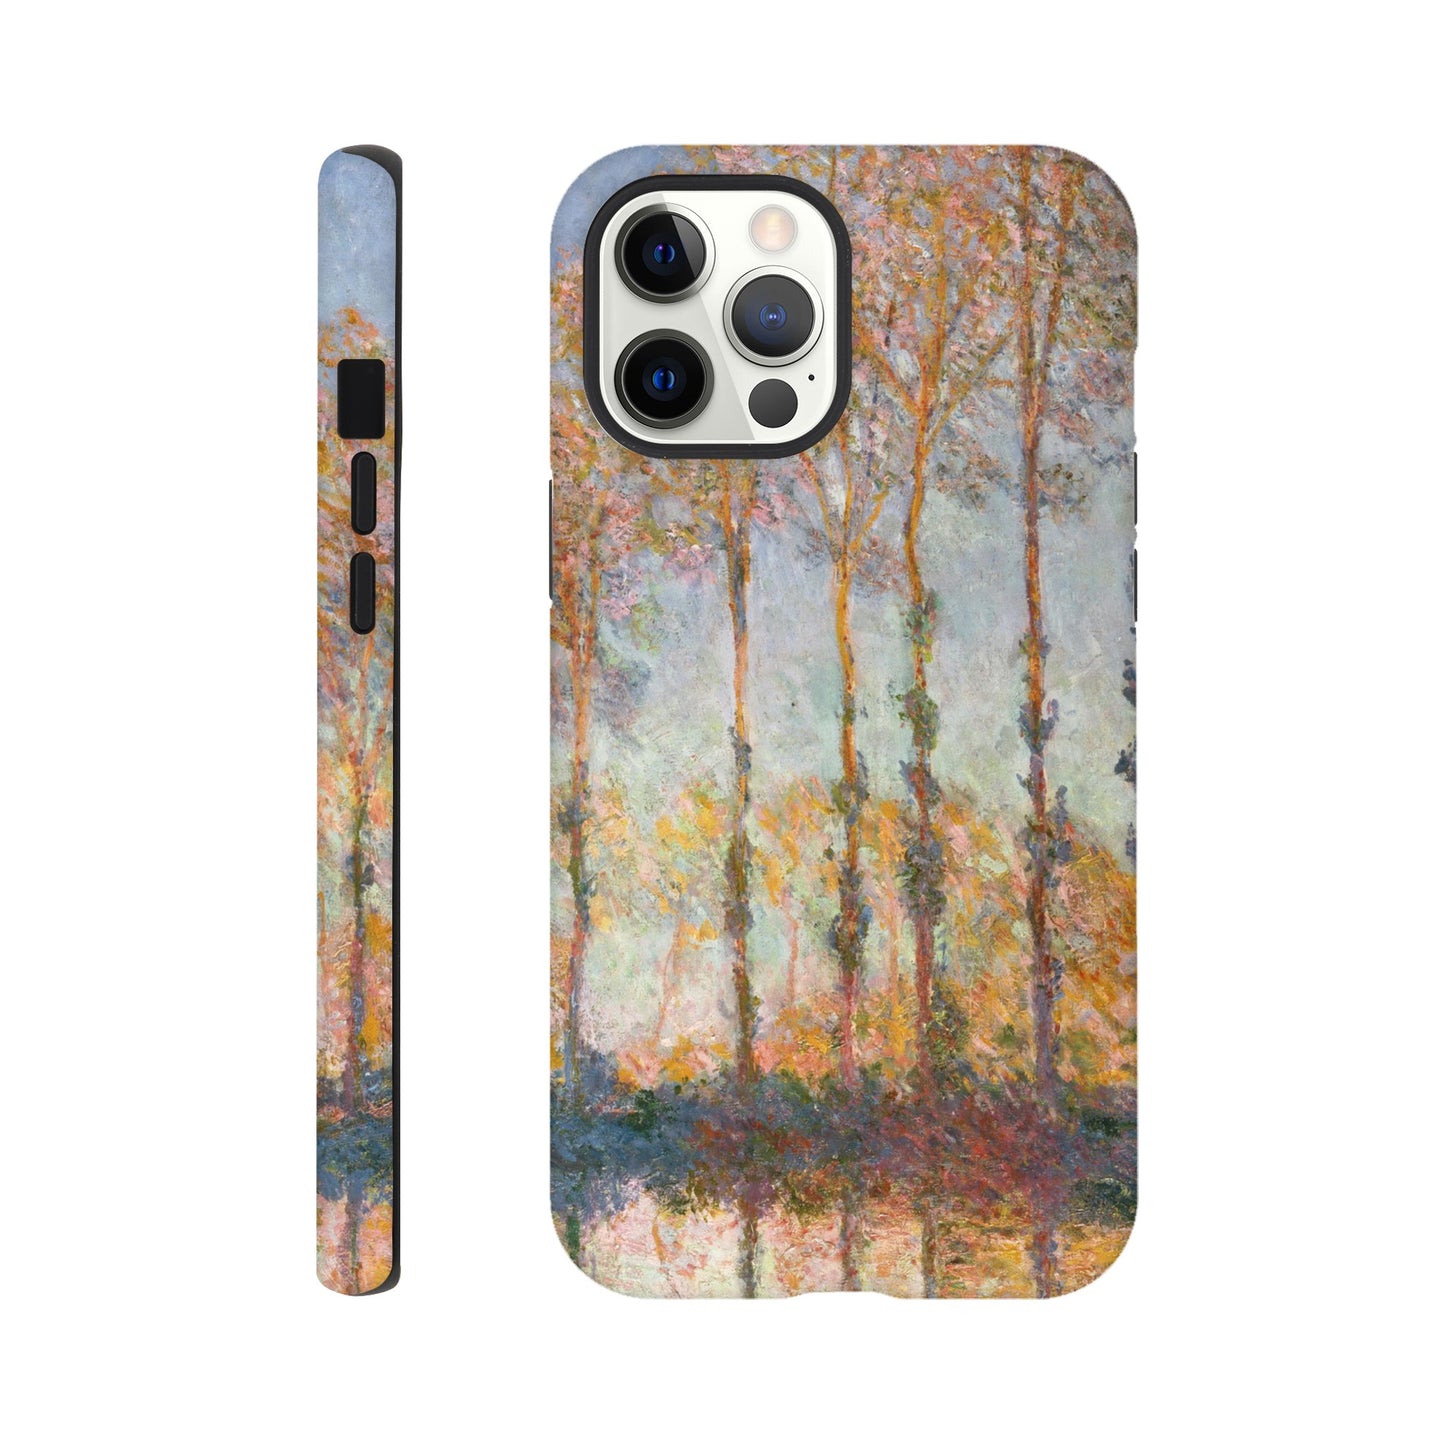 CLAUD MONET - POPLARS AT THE BANK OF EPTE RIVER - TOUGH PHONE CASE